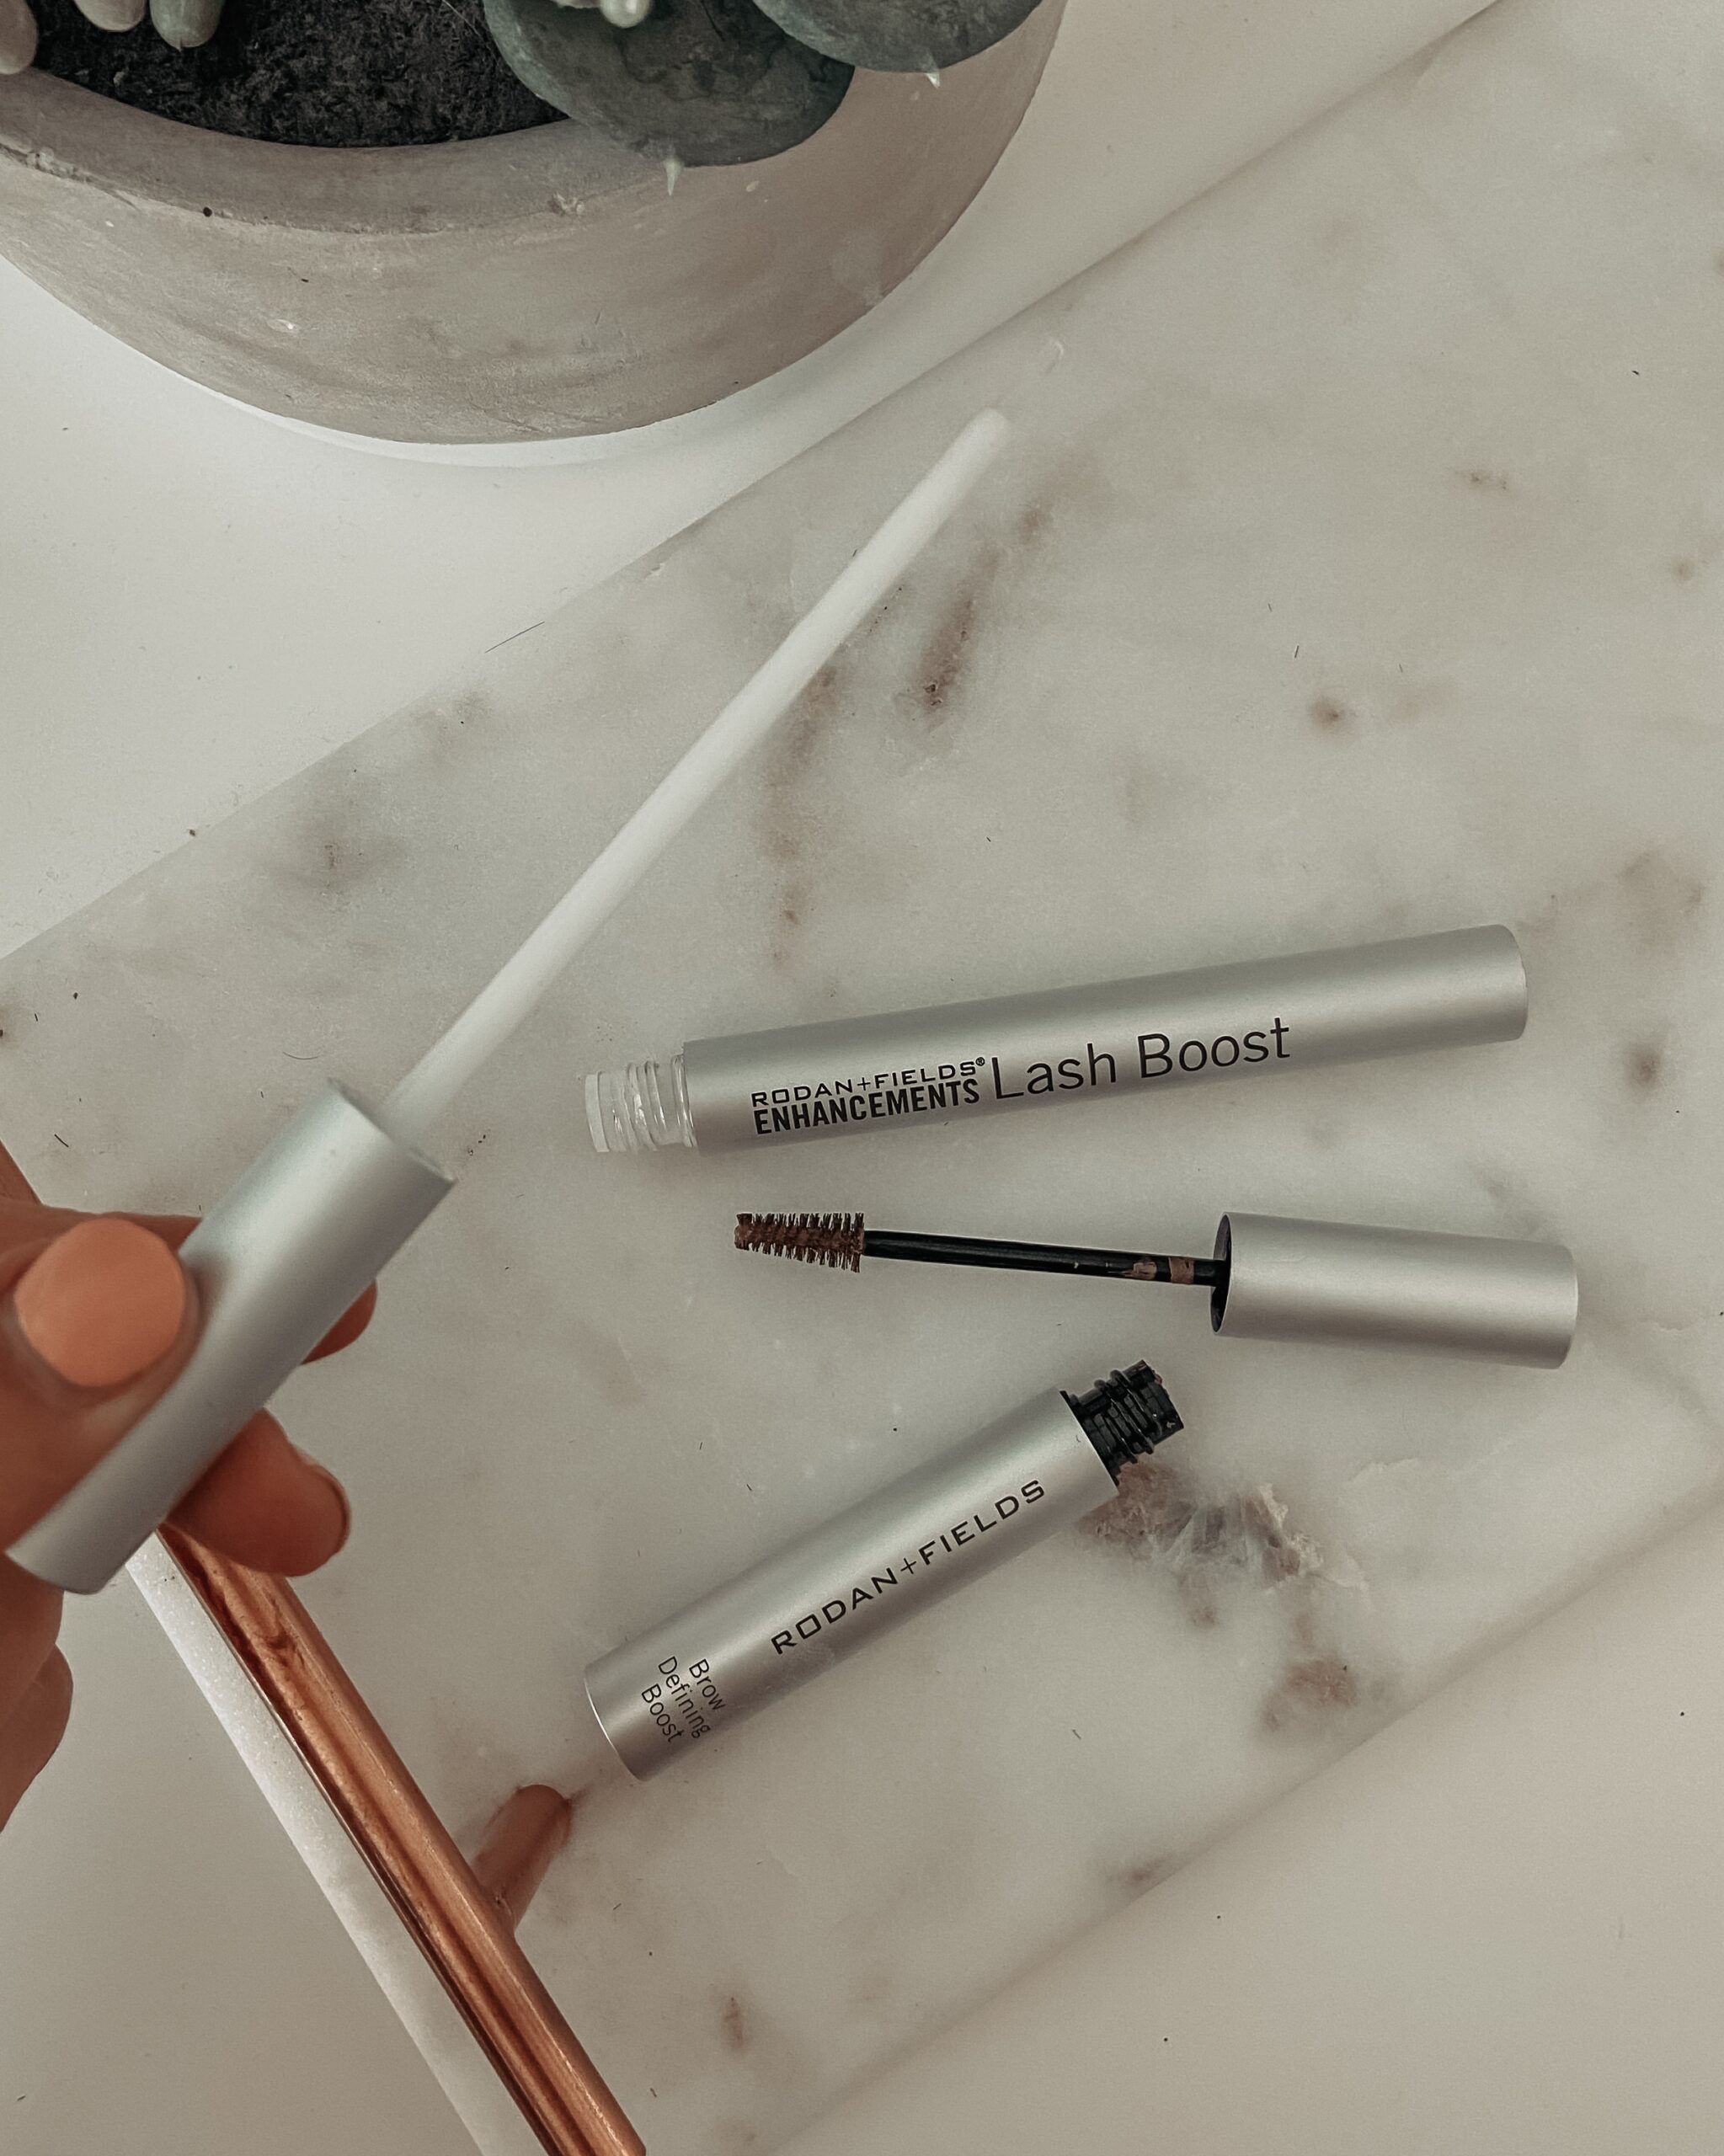 RODAN + FIELDS PRODUCT REVIEW: LASHBOOST + BROW DEFINING BOOST- Jaclyn De Leon Style. Sharing my review of lash and brow enhancing products from R+F.